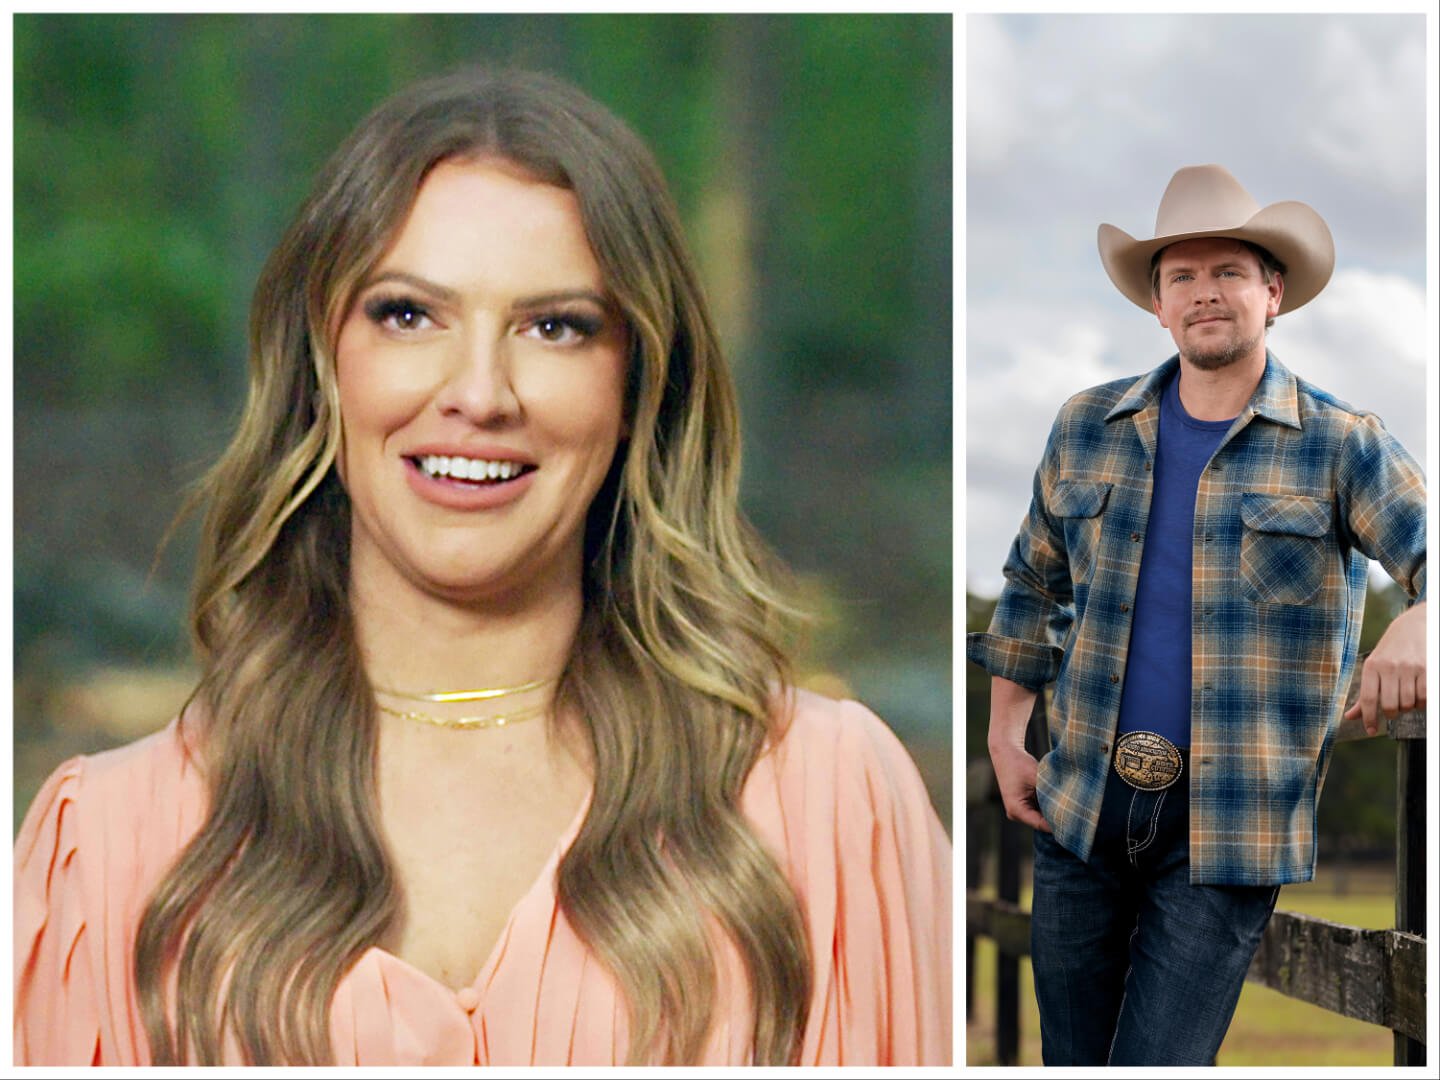 Side by side photos of 'Farmer Wants a Wife' cast members Heather and Landon